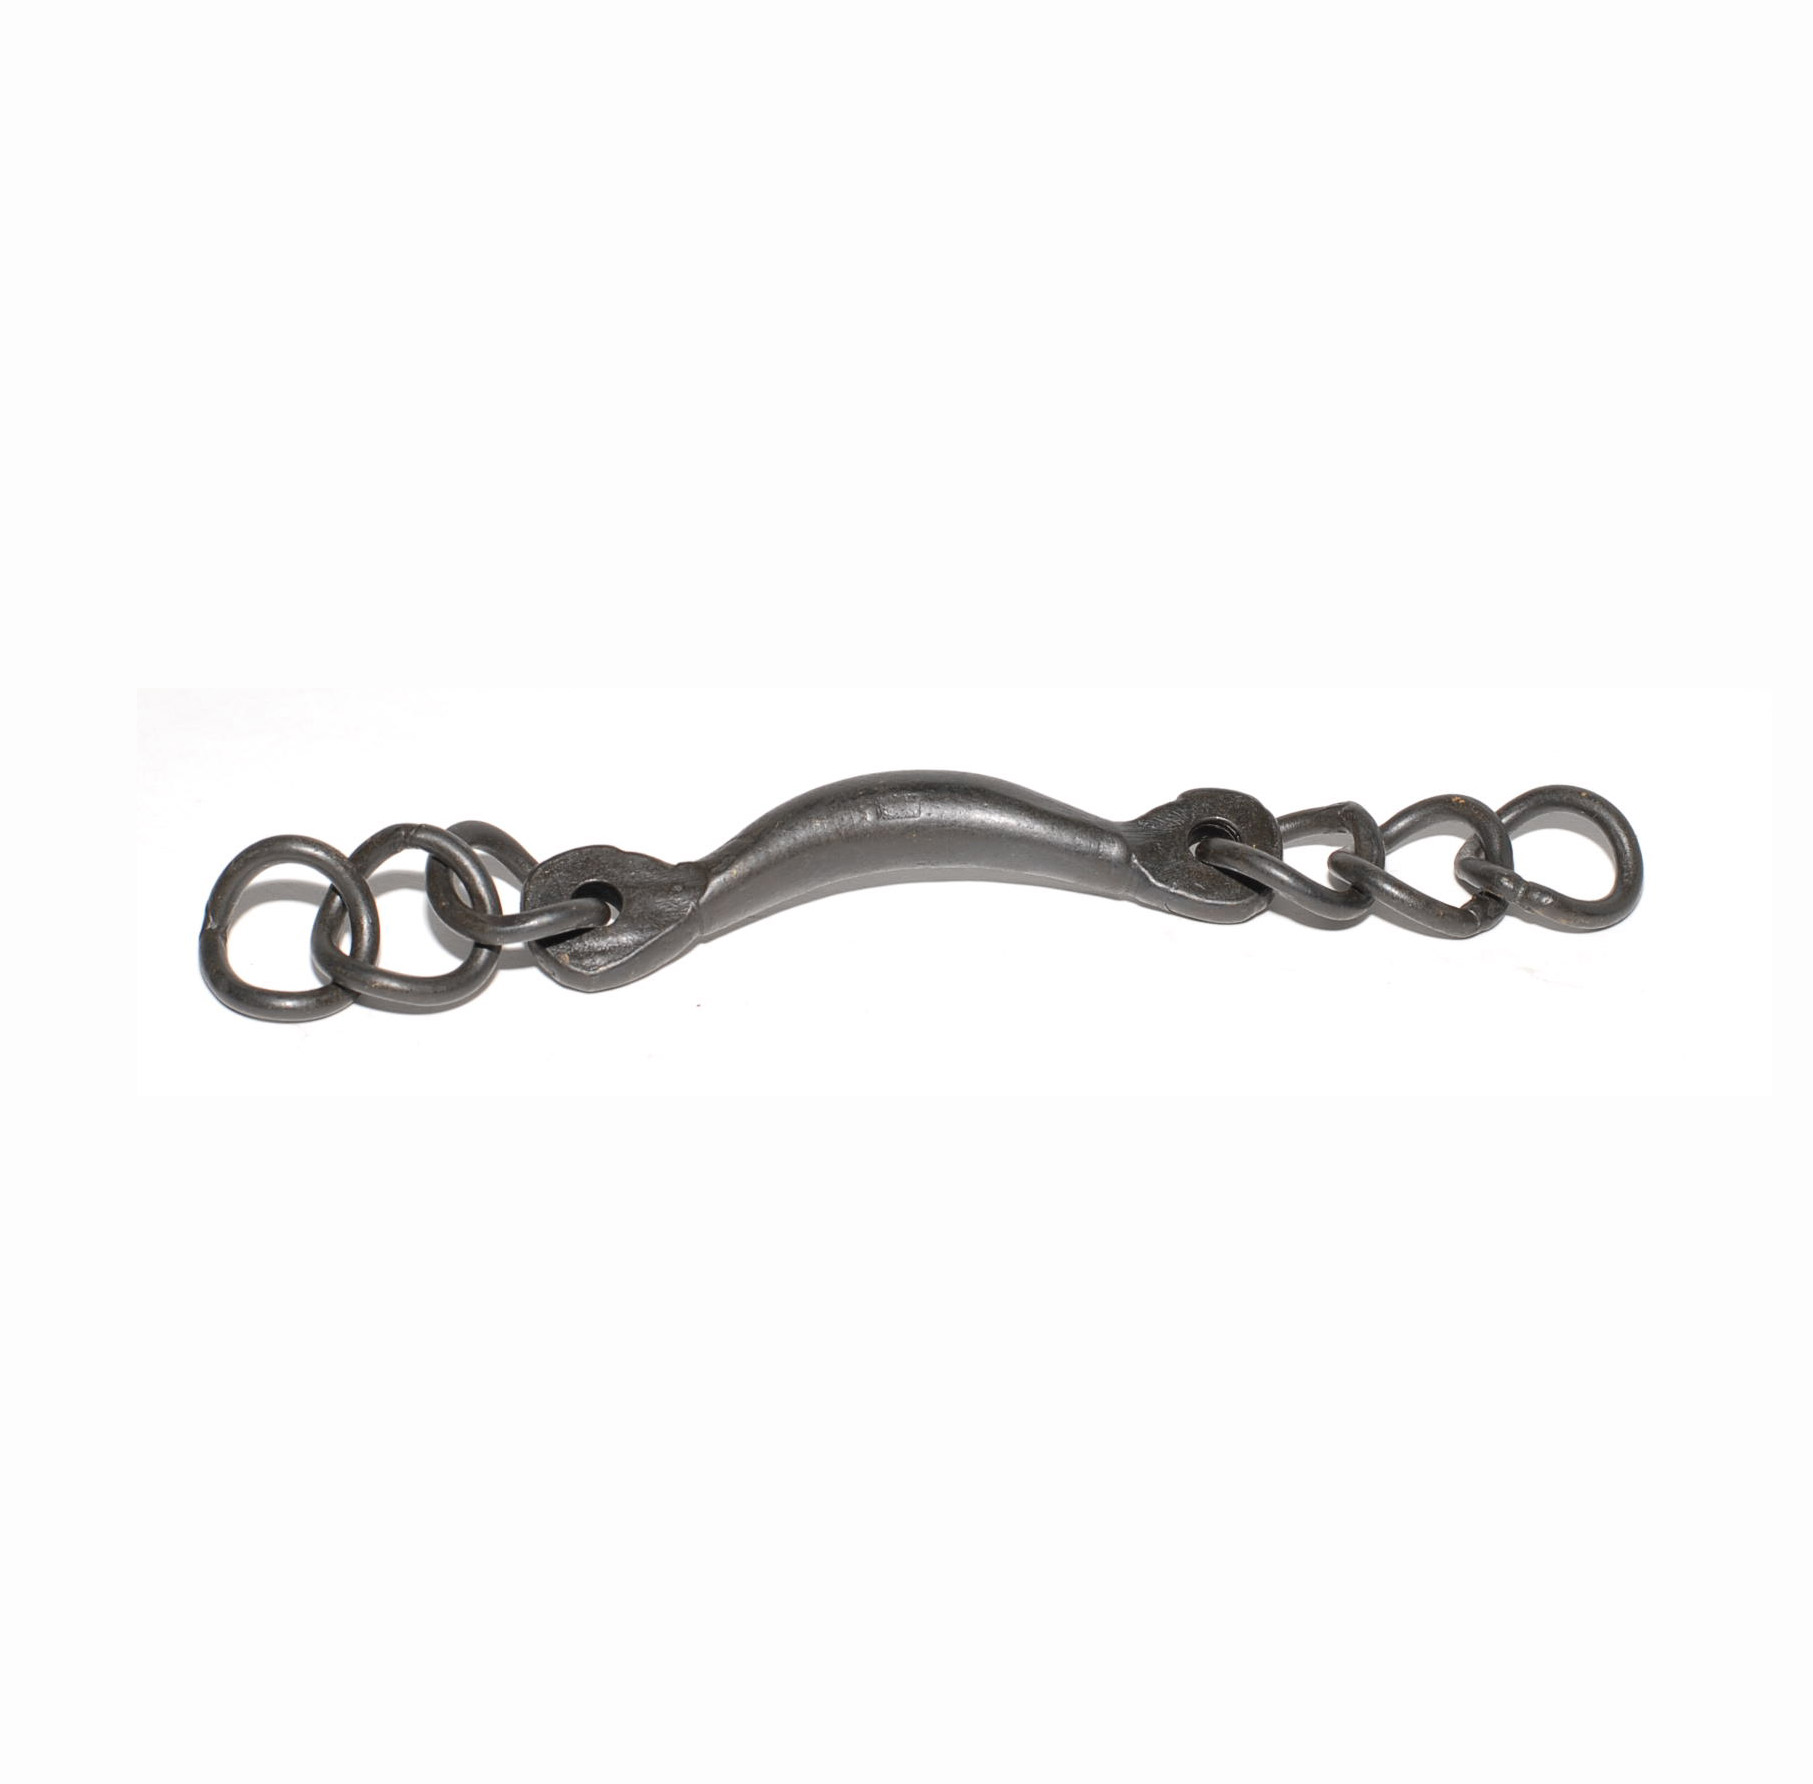 Korsteel Curb Chain Twin Link Stainless Steel 142580 for sale online